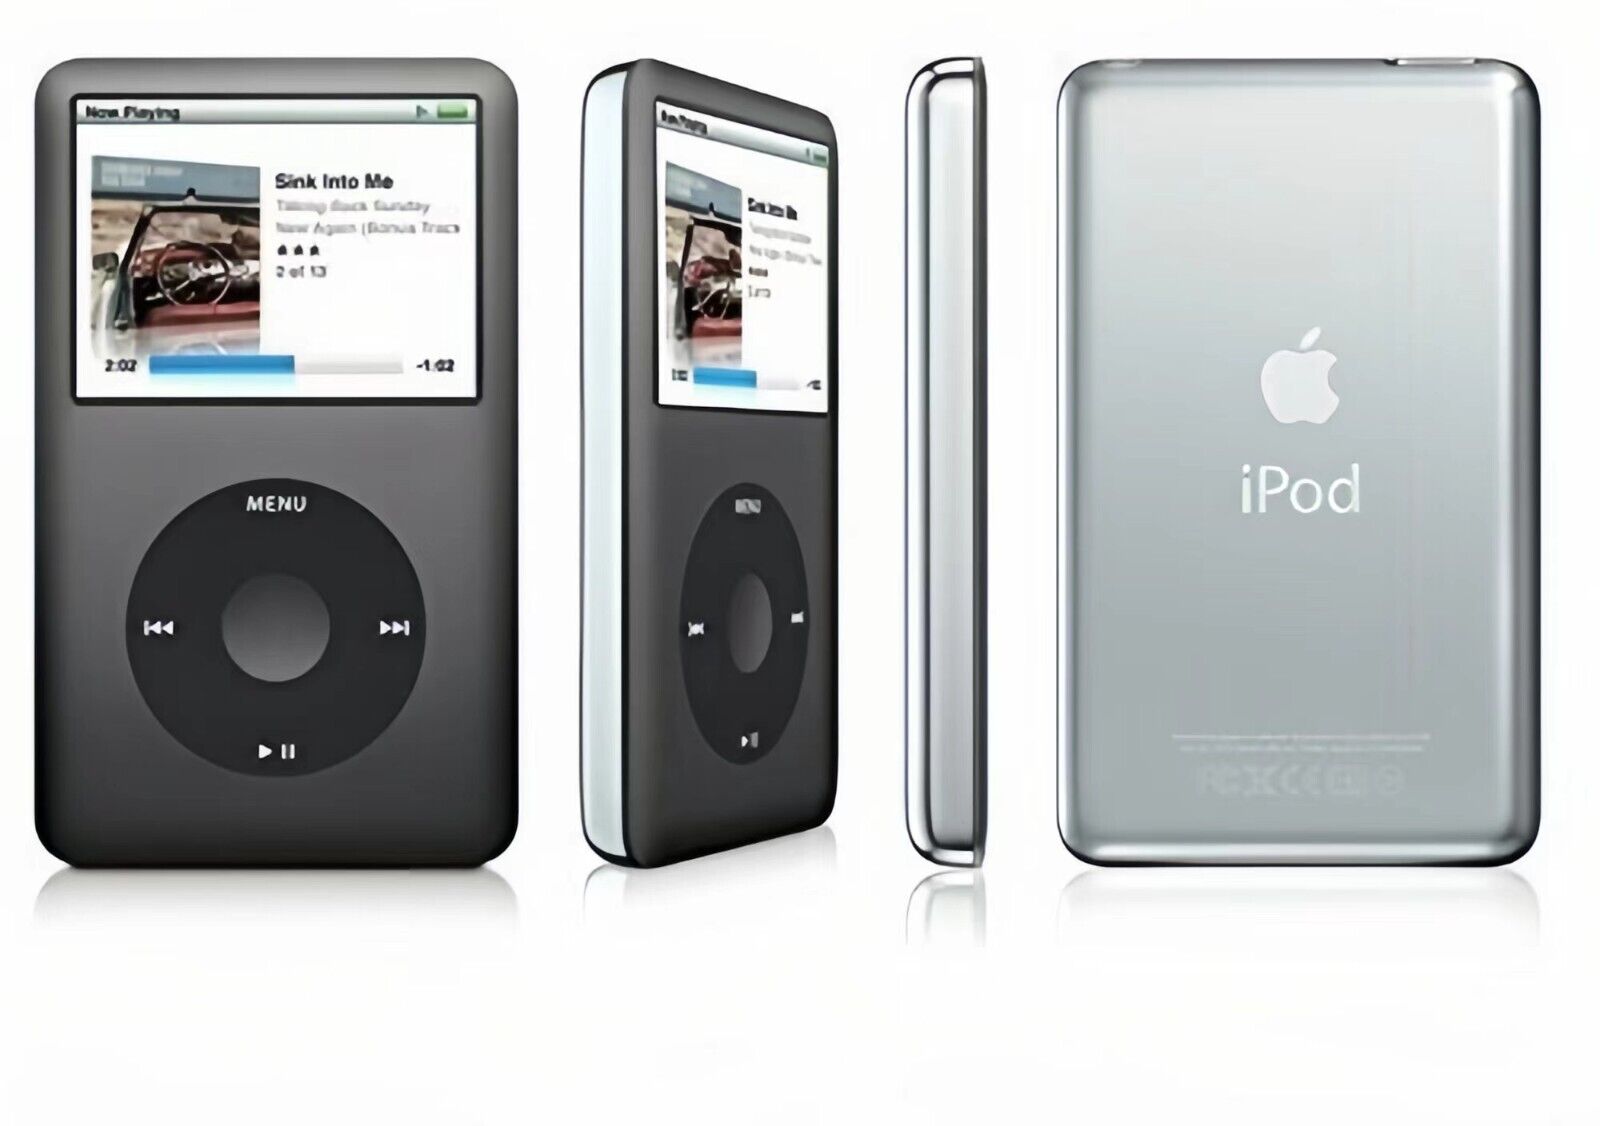 Apple 7th Generation iPod 160GB Black Classic| MP3 Audio/Video Player | Like New - image 4 of 5